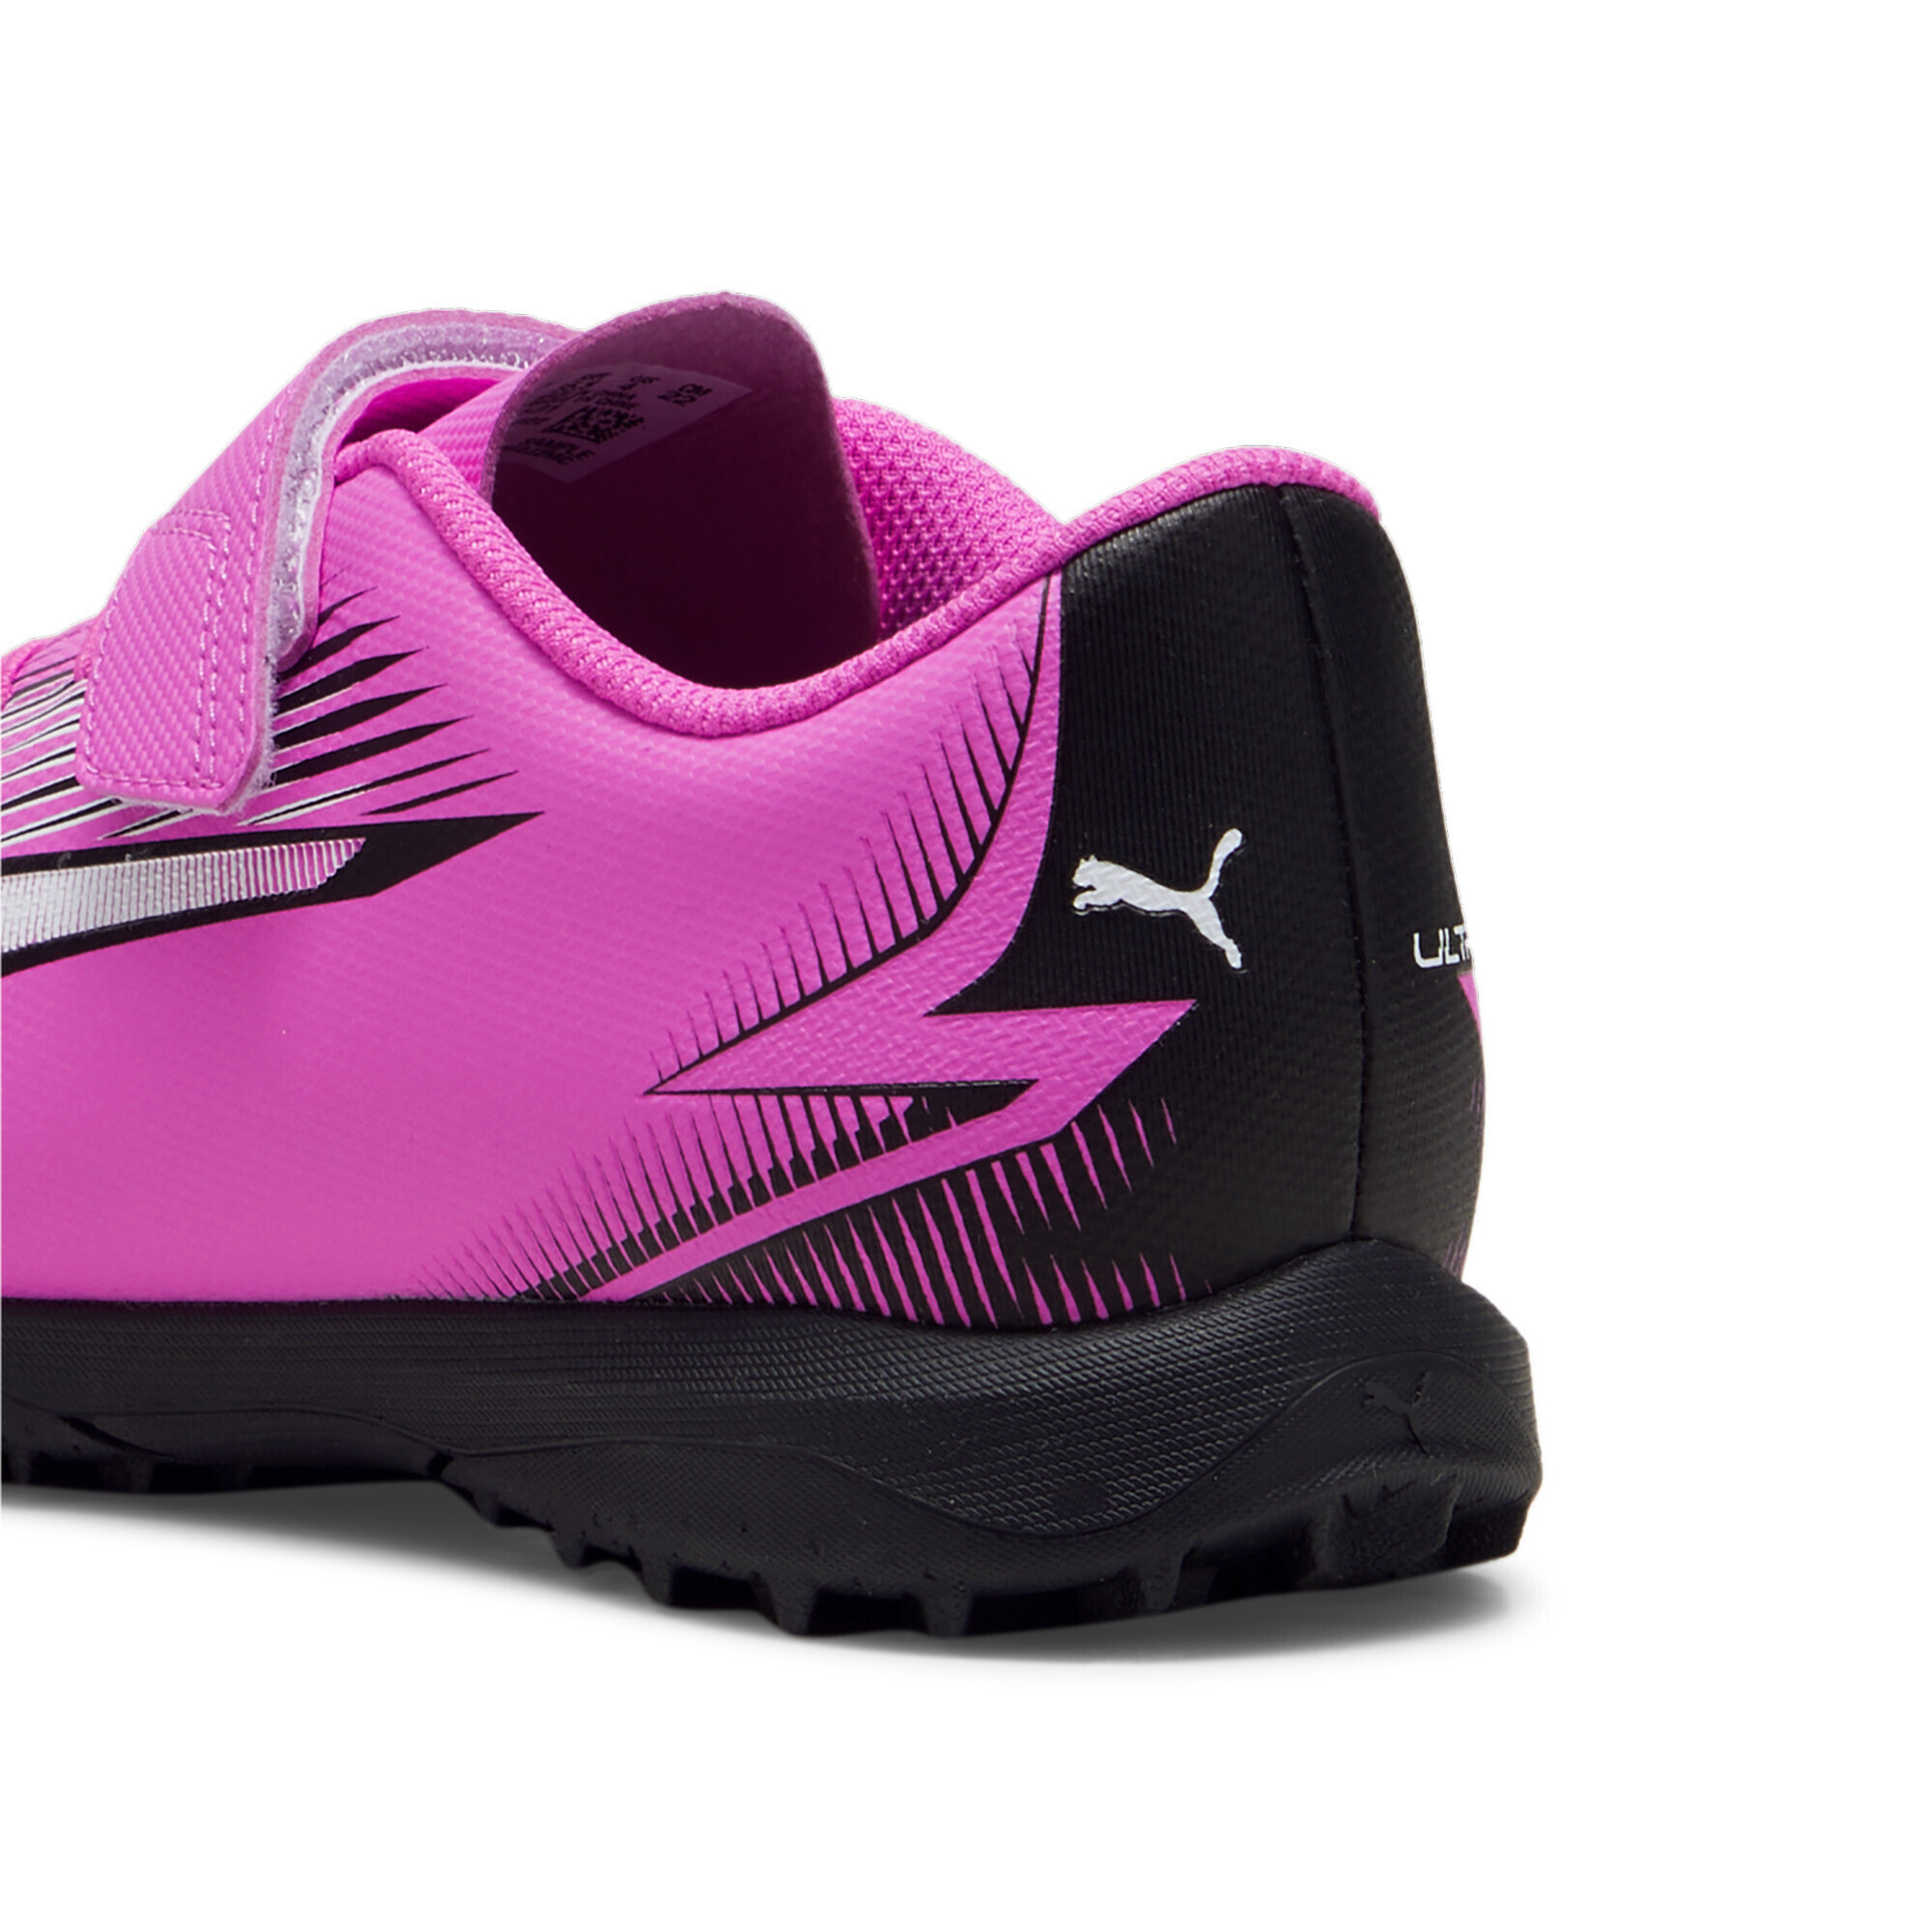 PUMA ULTRA PLAY TT Youth Football Boots In Pink, Size EU 38.5